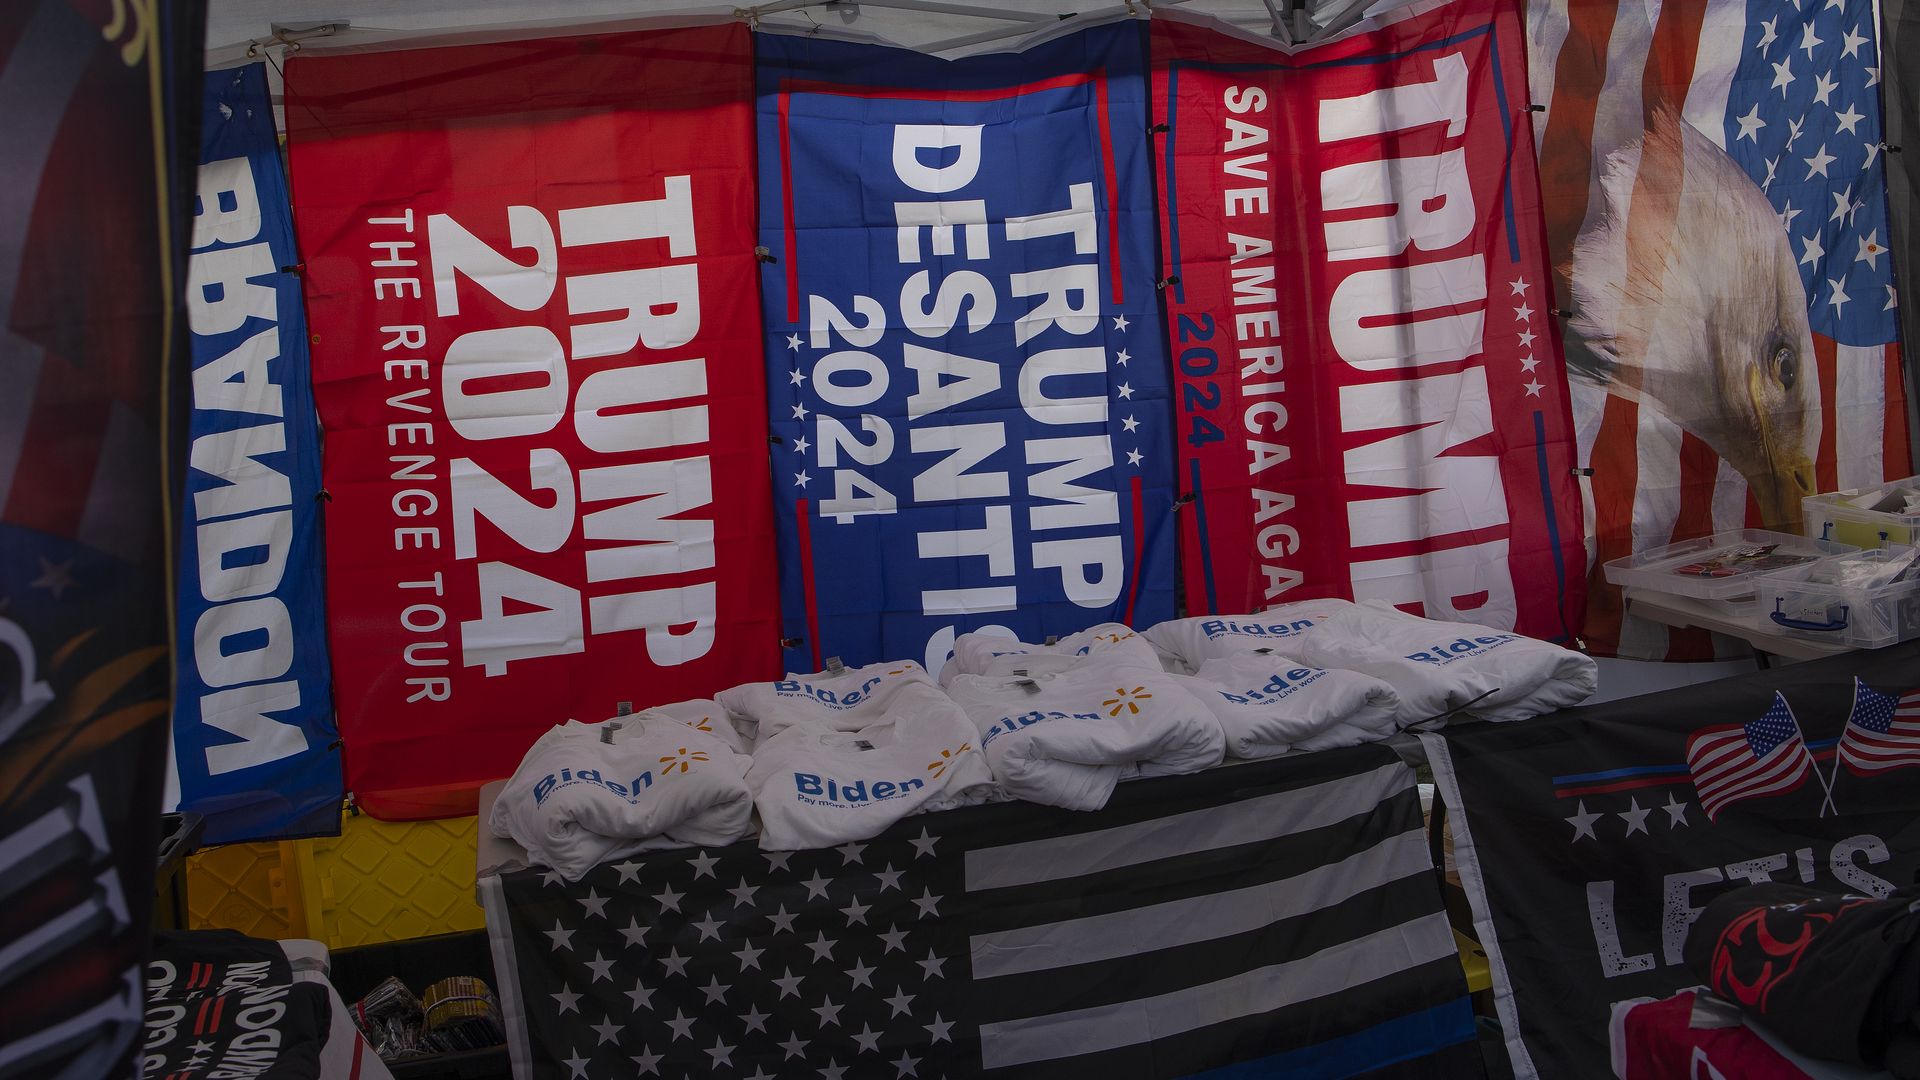 Banners for former President Donald Trump and Florida Gov. Ron DeSantis are pictured at a conservative rally.